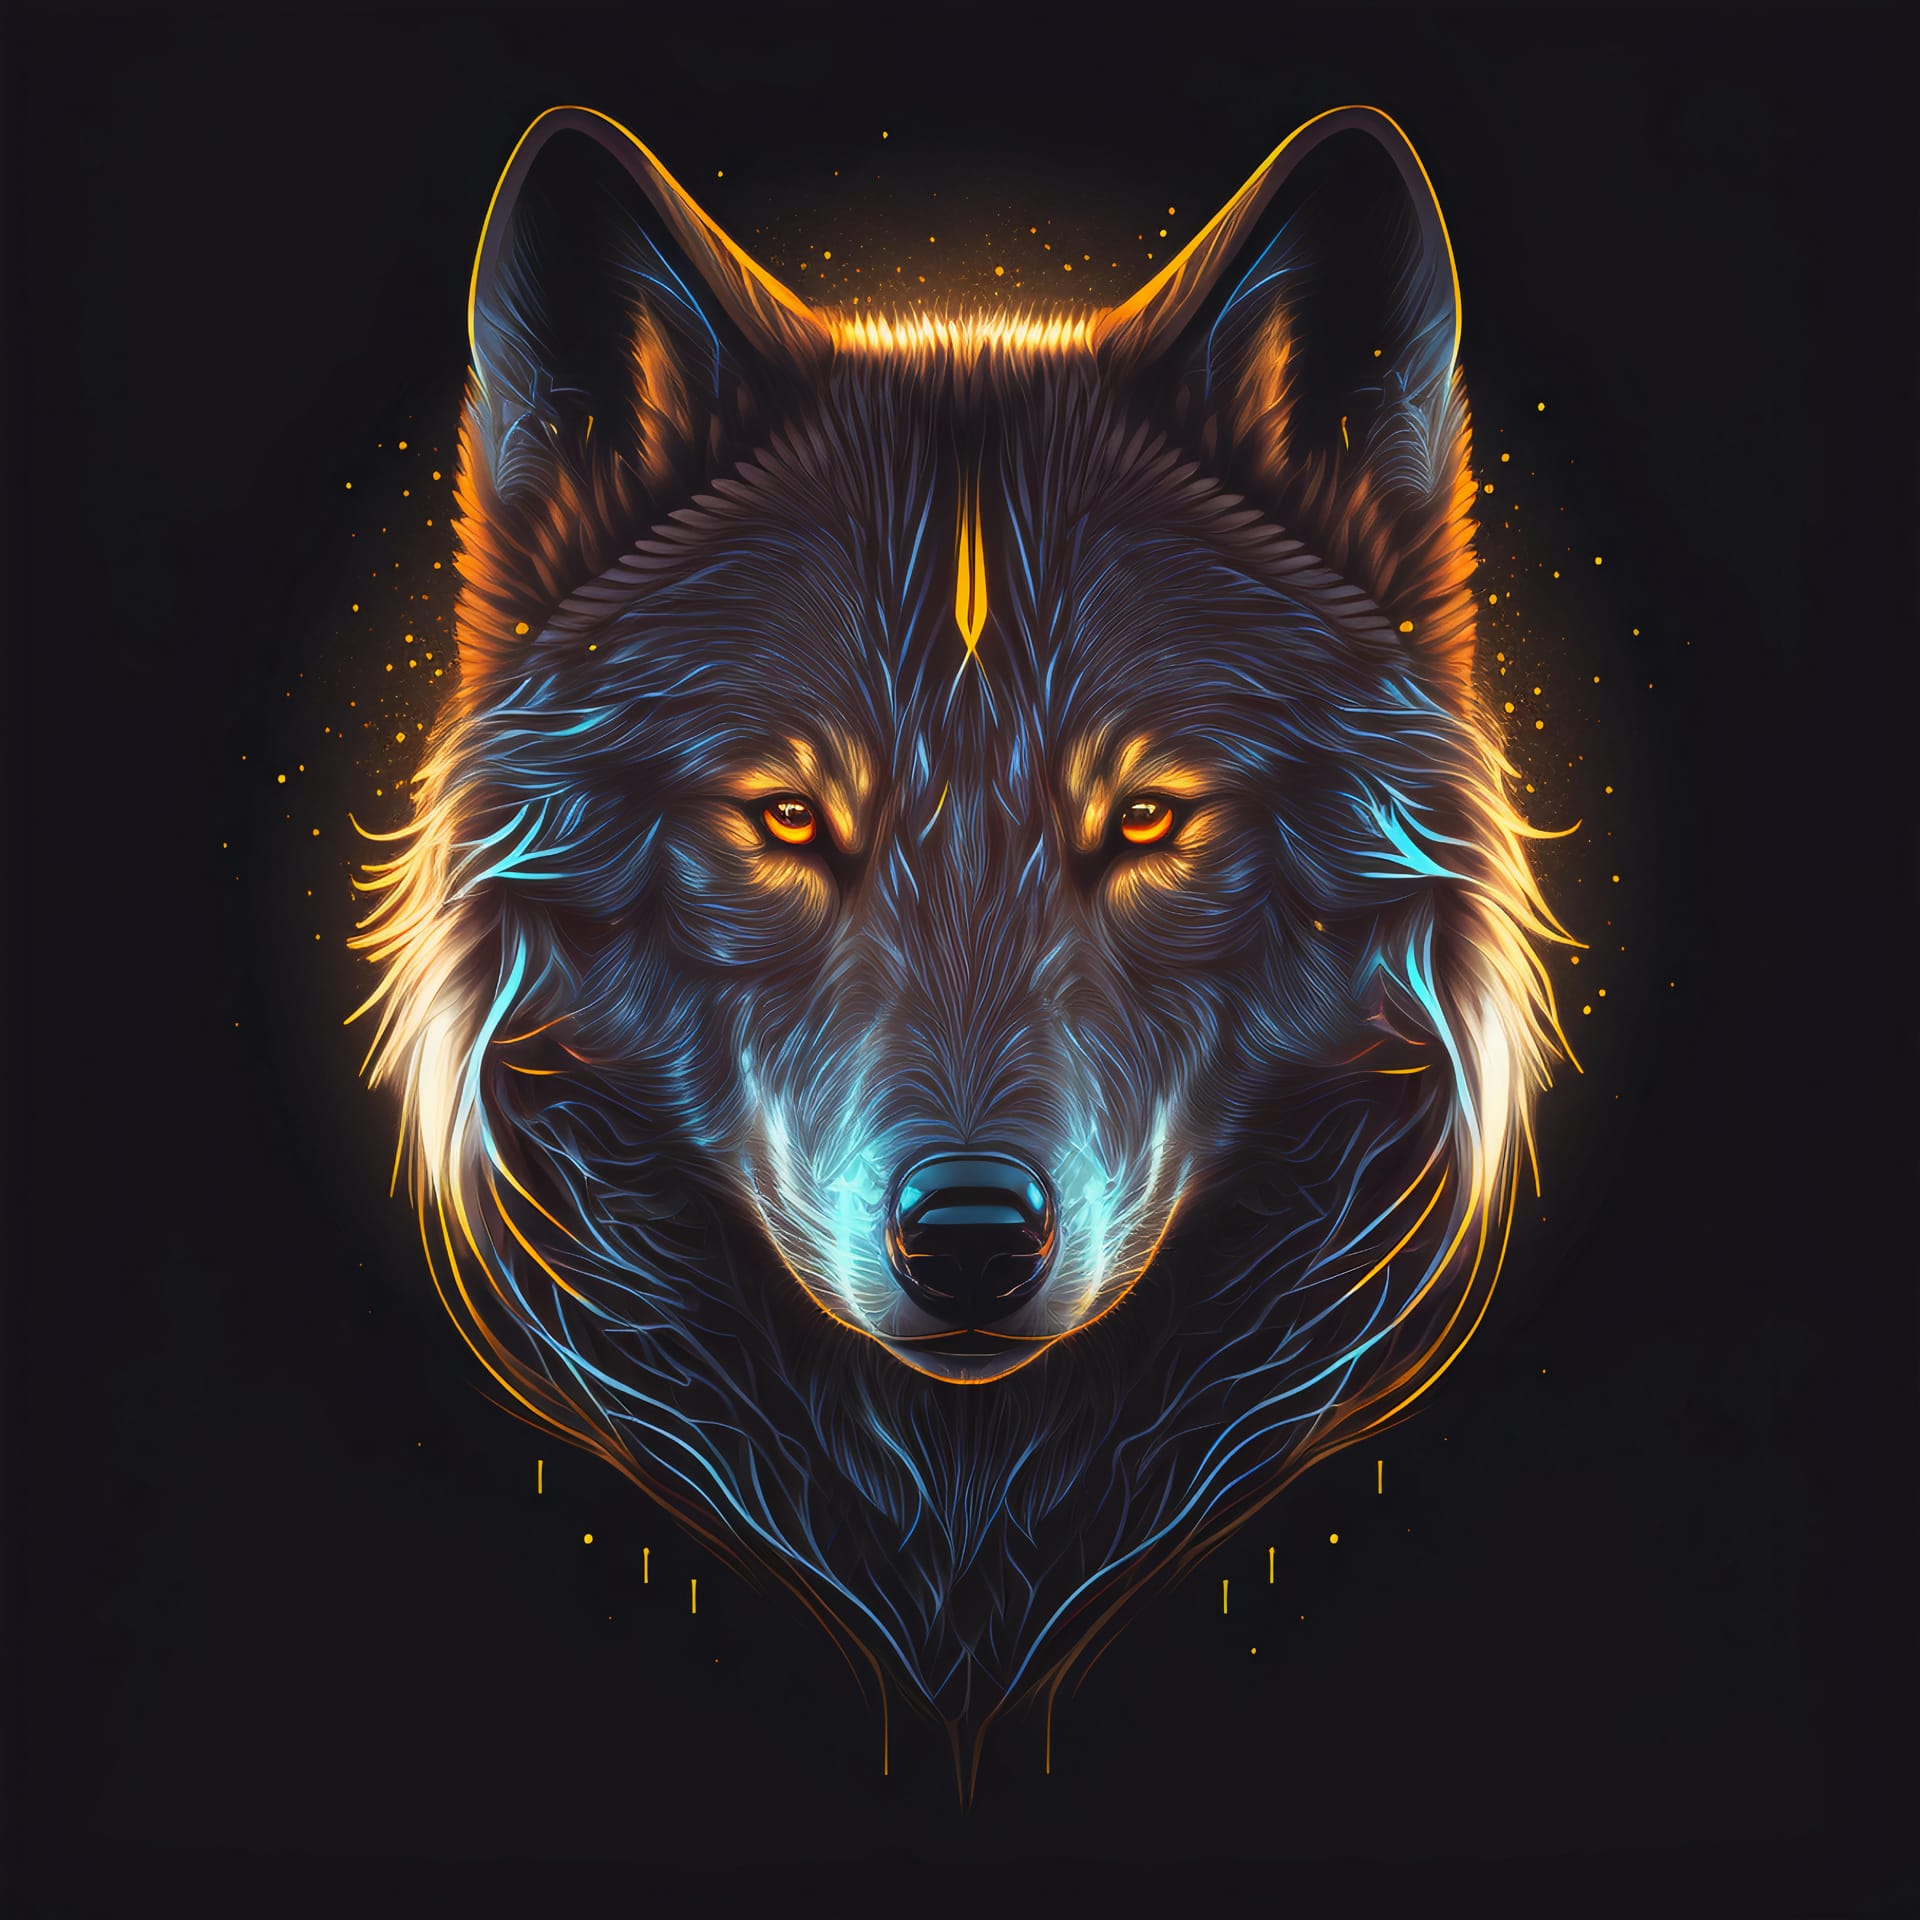 Illustration front view wolf head surprisingly perfect design excellent image